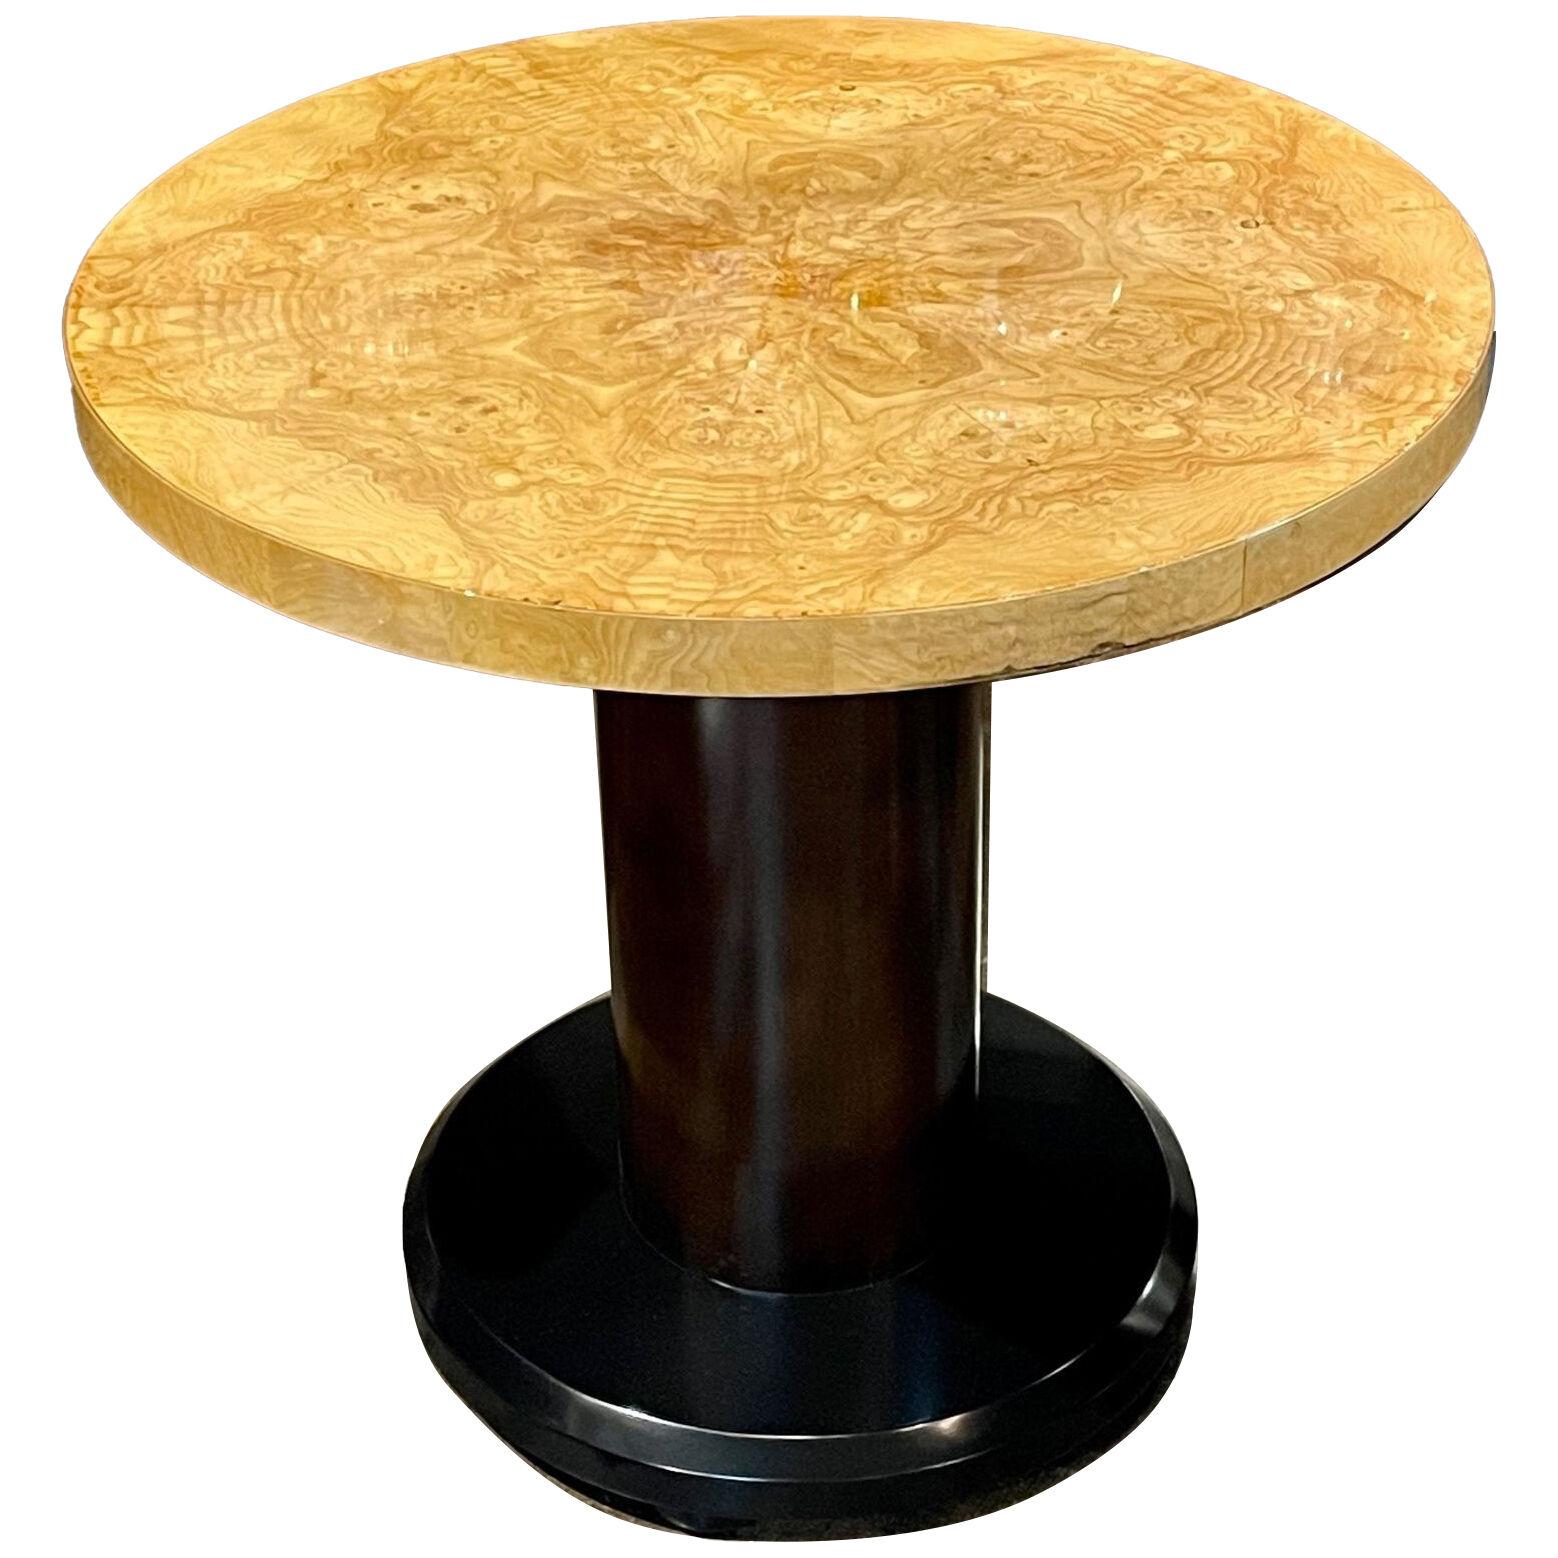 Vintage Art Deco Style Polished Elmwood and Black Lacquer Side Table